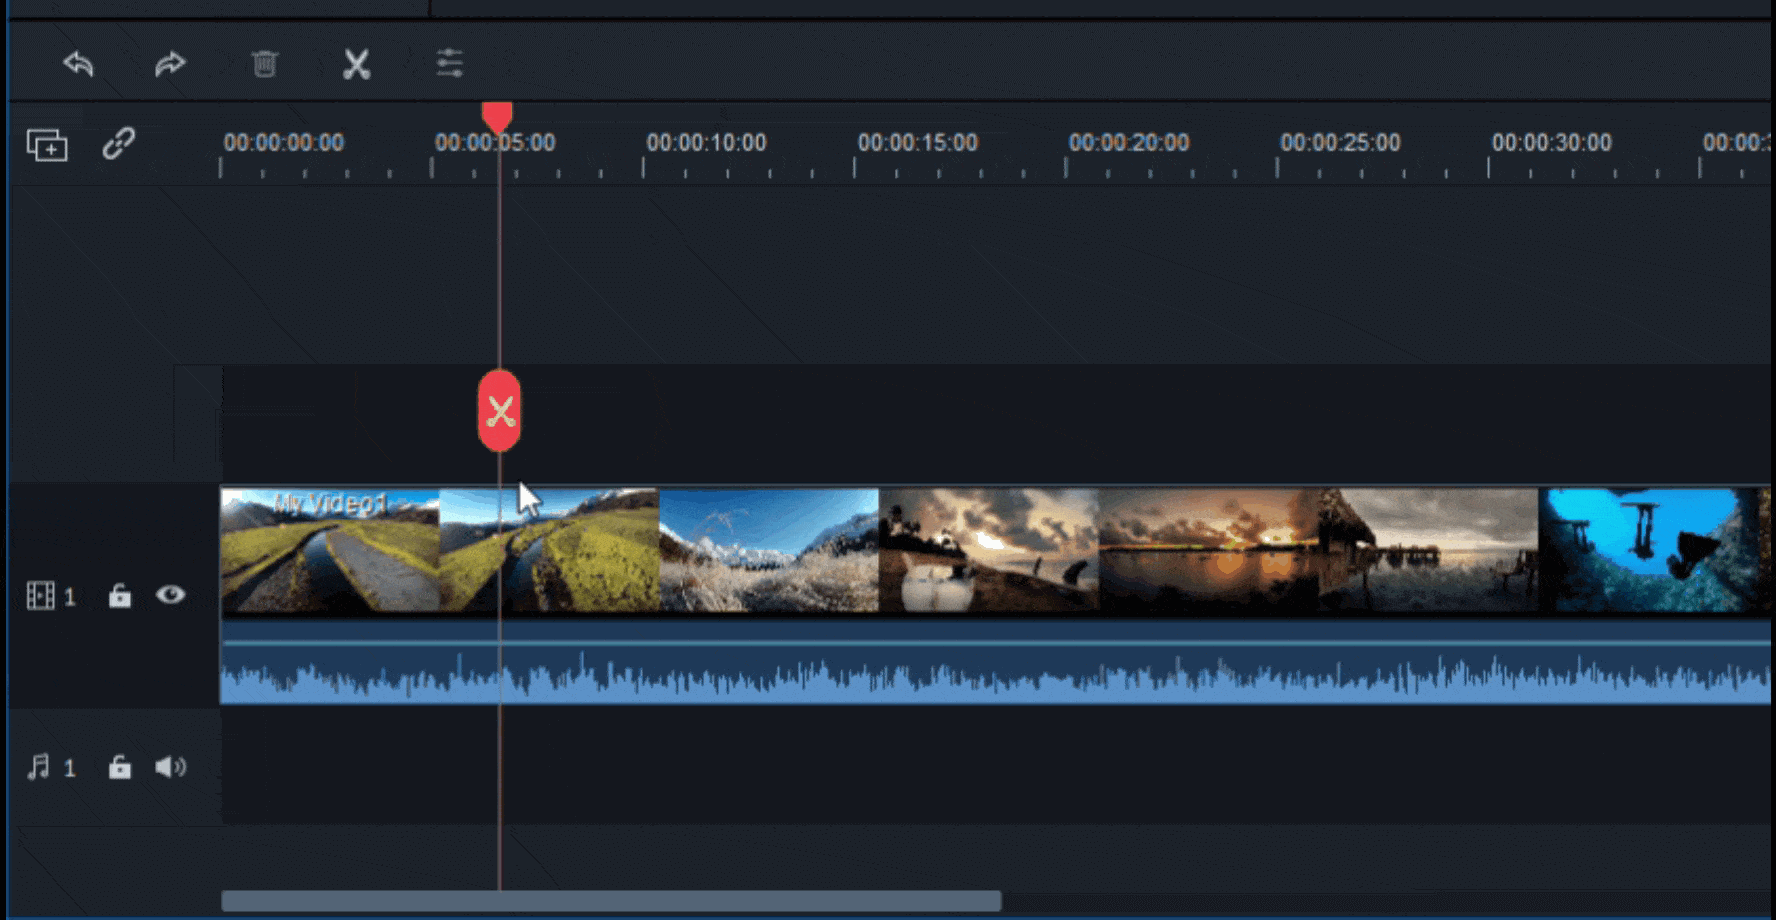 drag and drop video into timeline